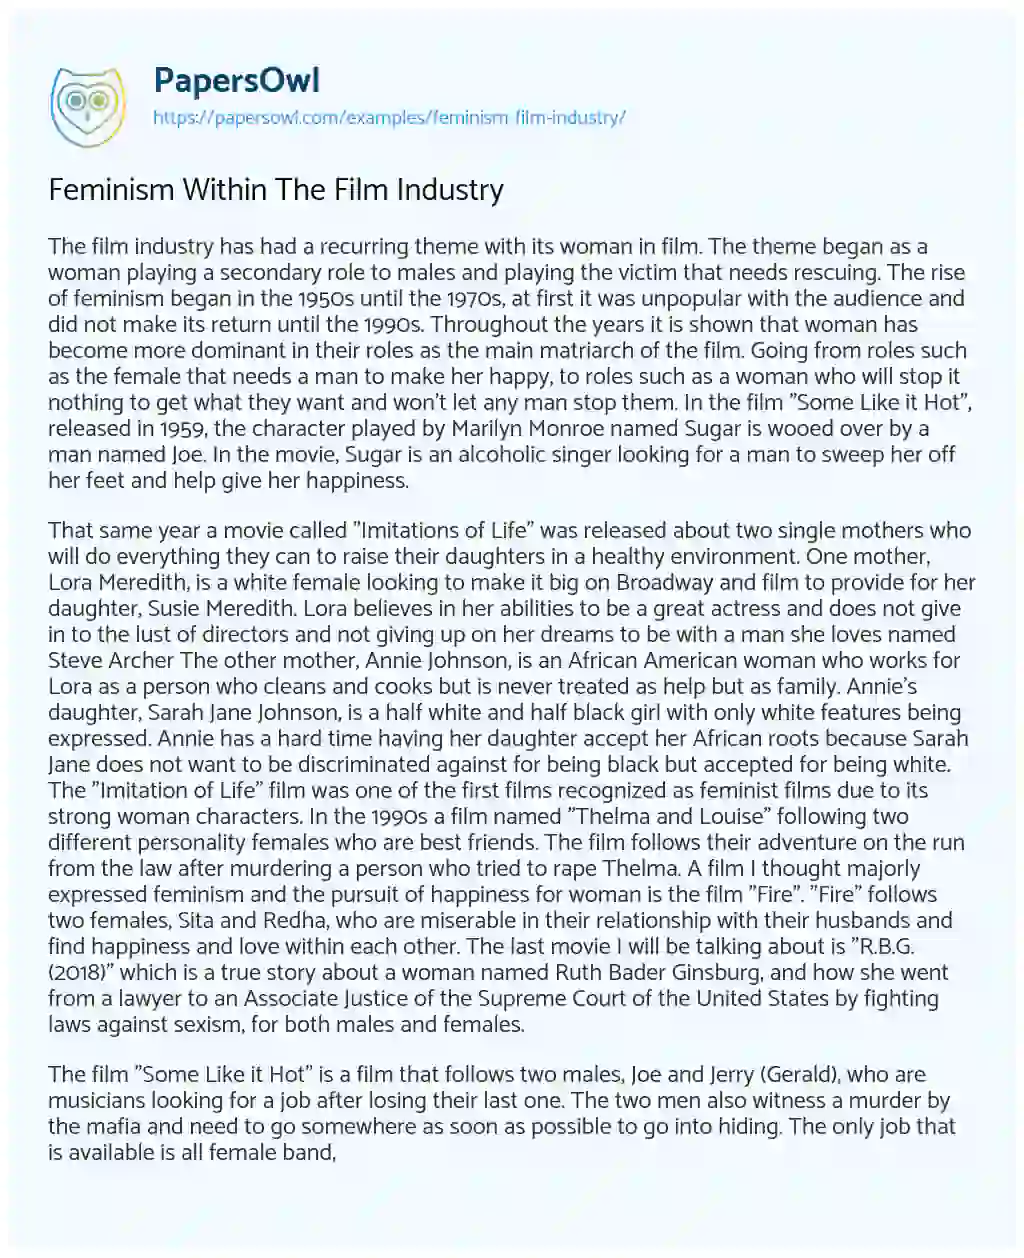 Essay on Feminism Within the Film Industry